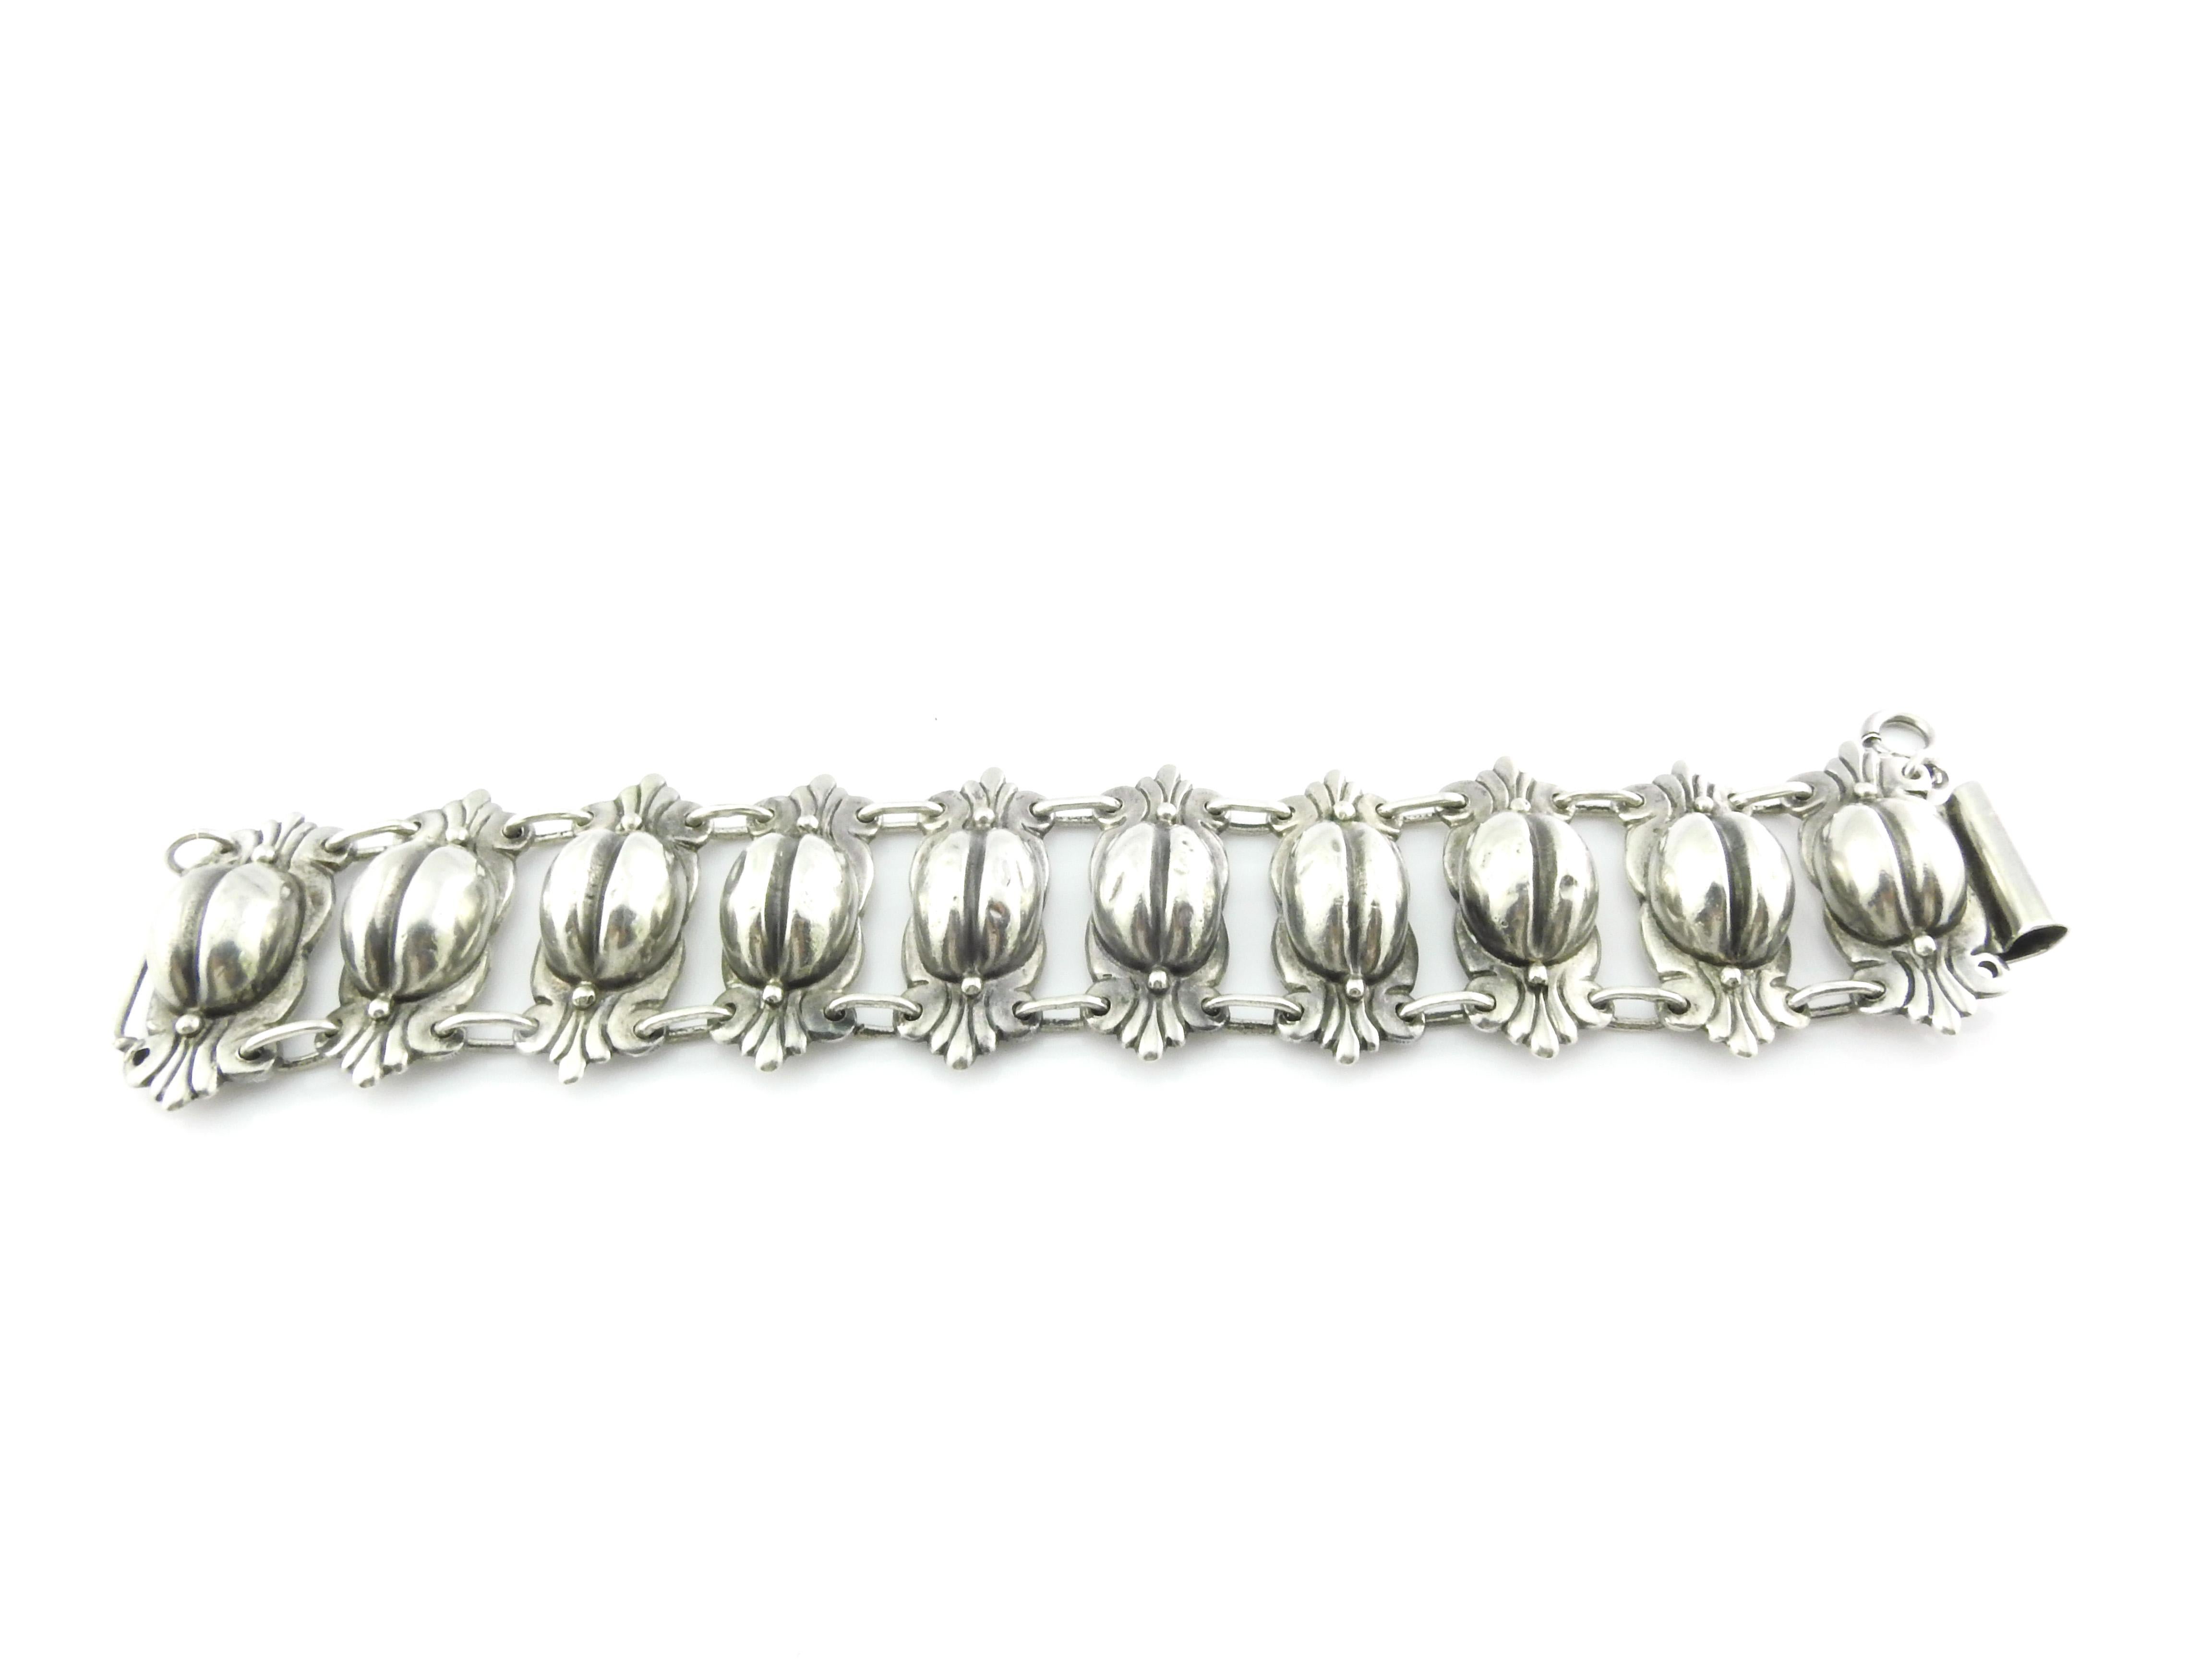 Vintage Mexican 850 Silver Coffee Bean & Foliage Link Bracelet

This is a very ornate and very heavy old Mexican silver bracelet with a wonderful coffee bean and foliage design and safety chain. The bracelet is comprised of 10 large coffee bean